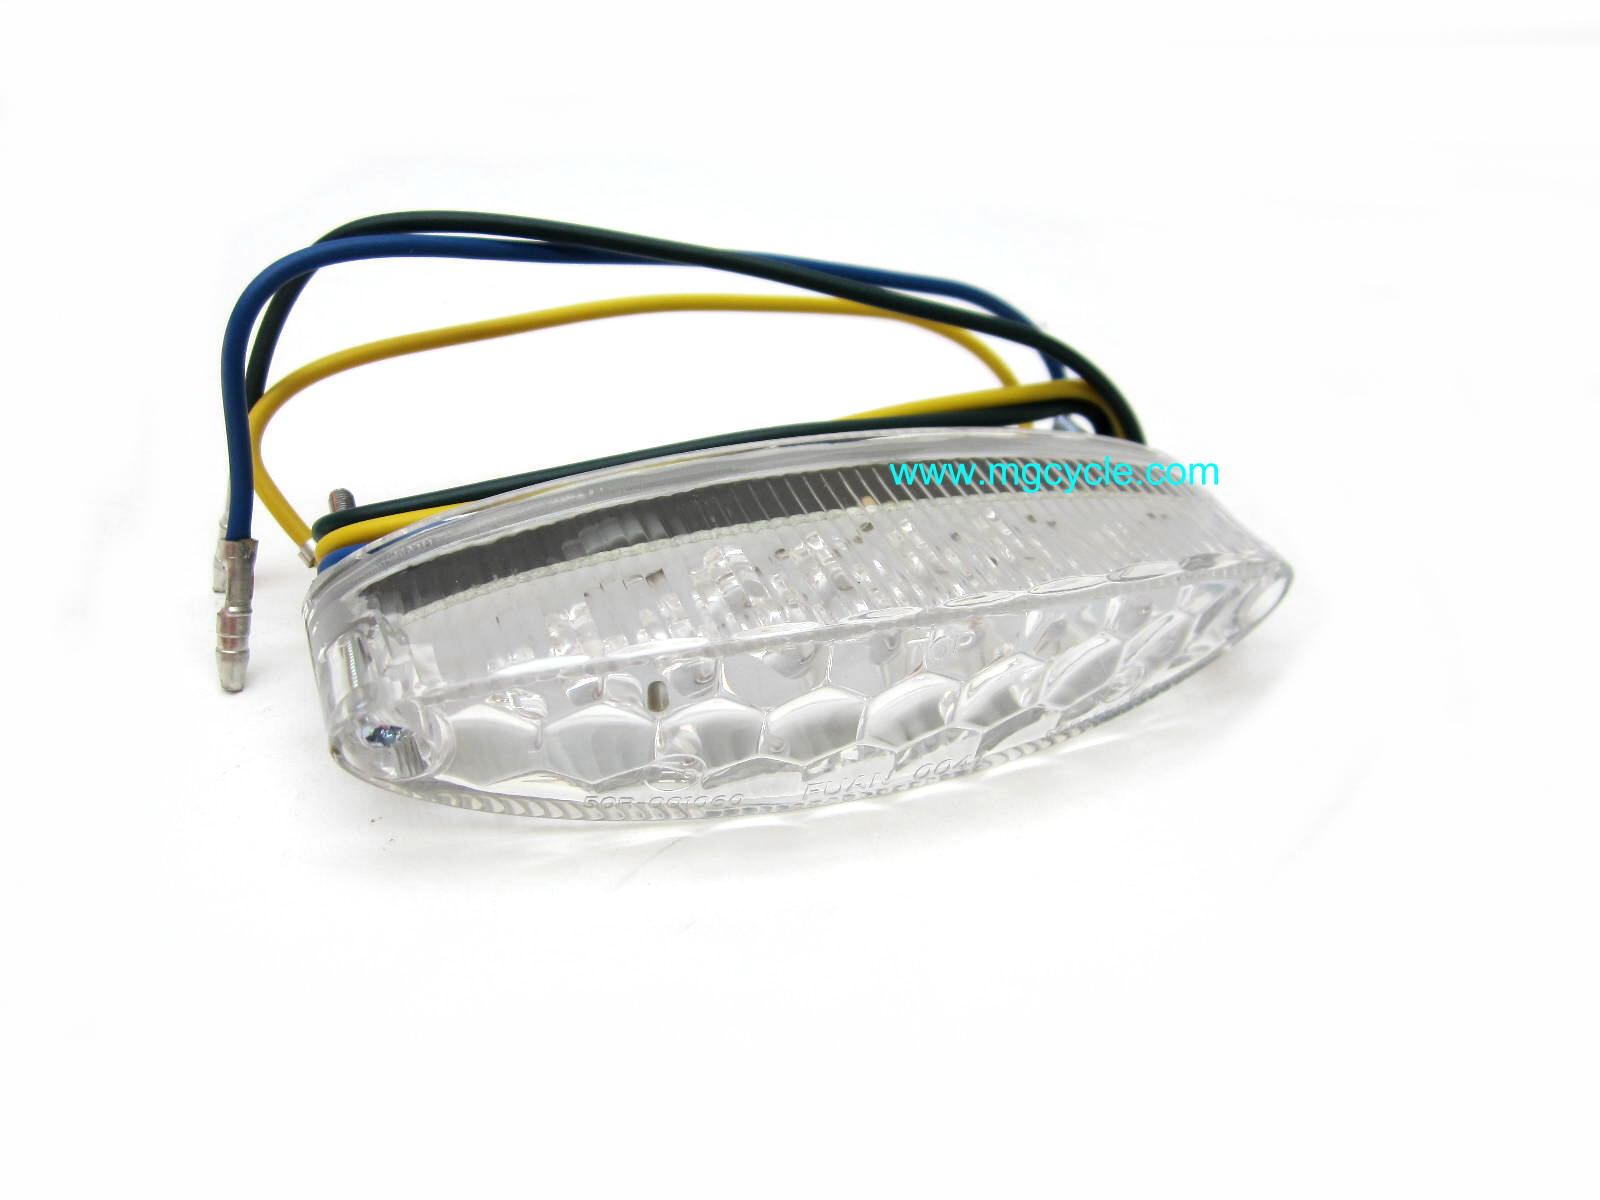 Replacement tail light for fender eliminator - Click Image to Close